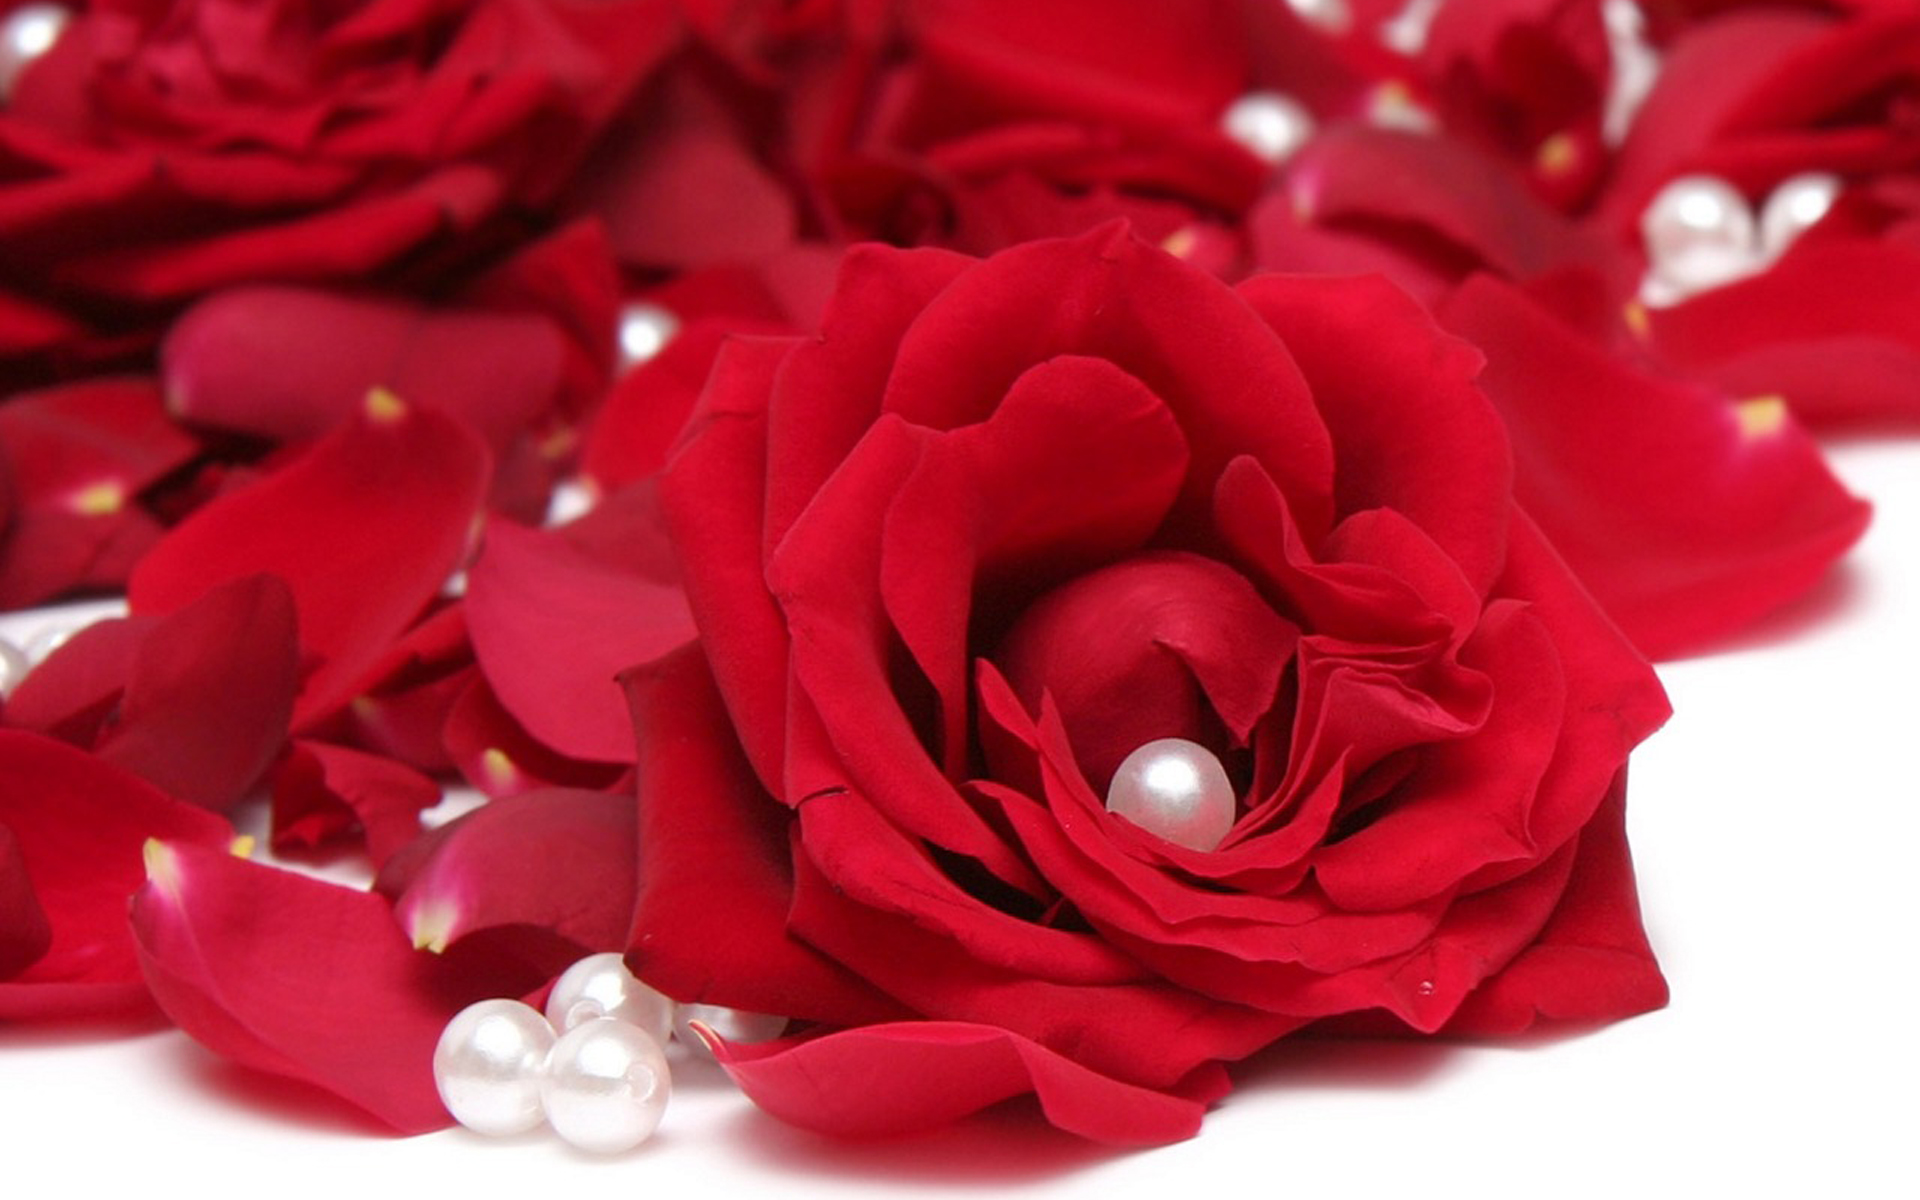 Beautiful Red Rose Images & HD Wallpapers